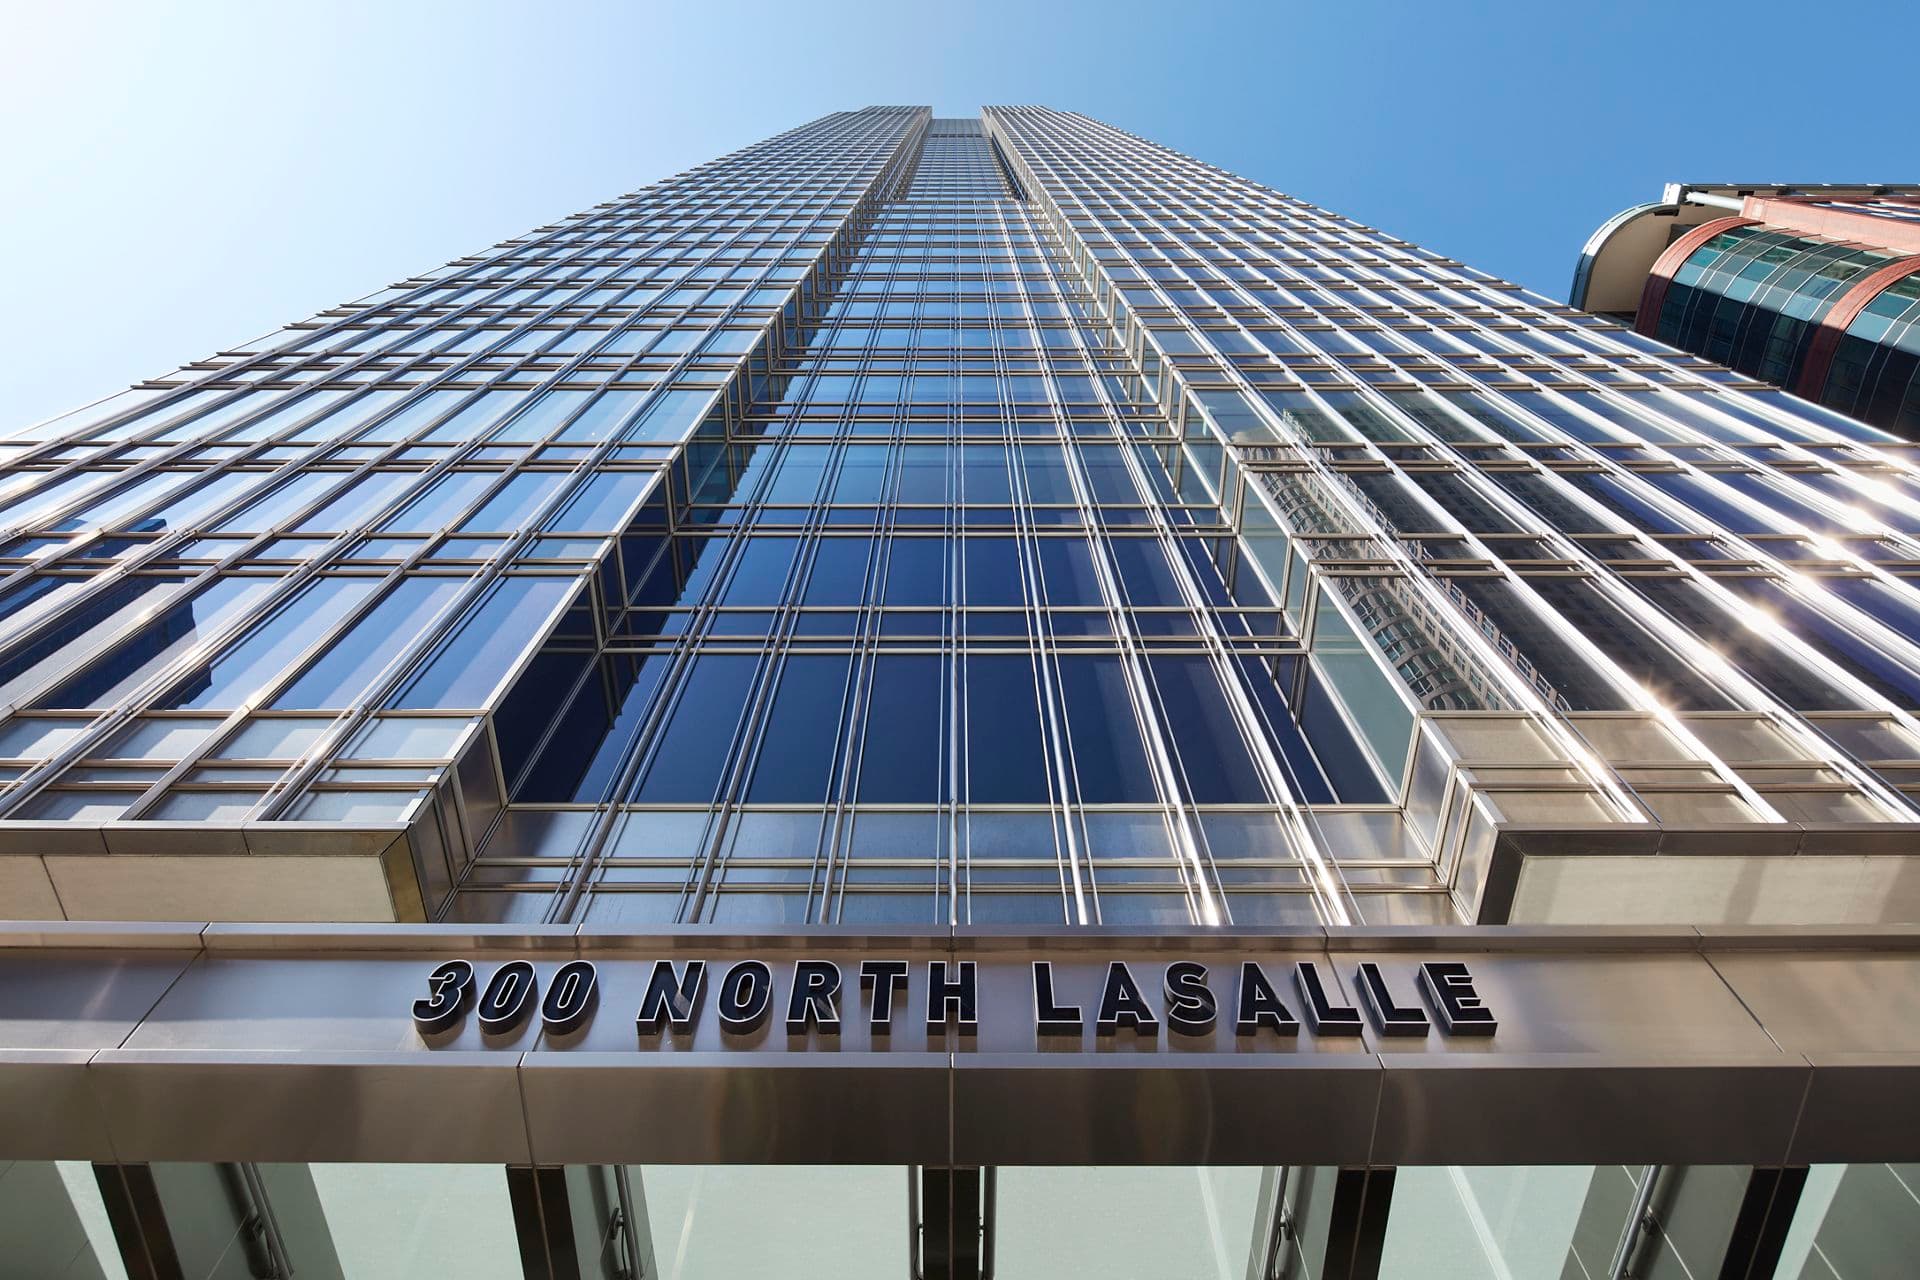 Building hero photography of 300 North LaSalle, River North, Chicago, Illinois